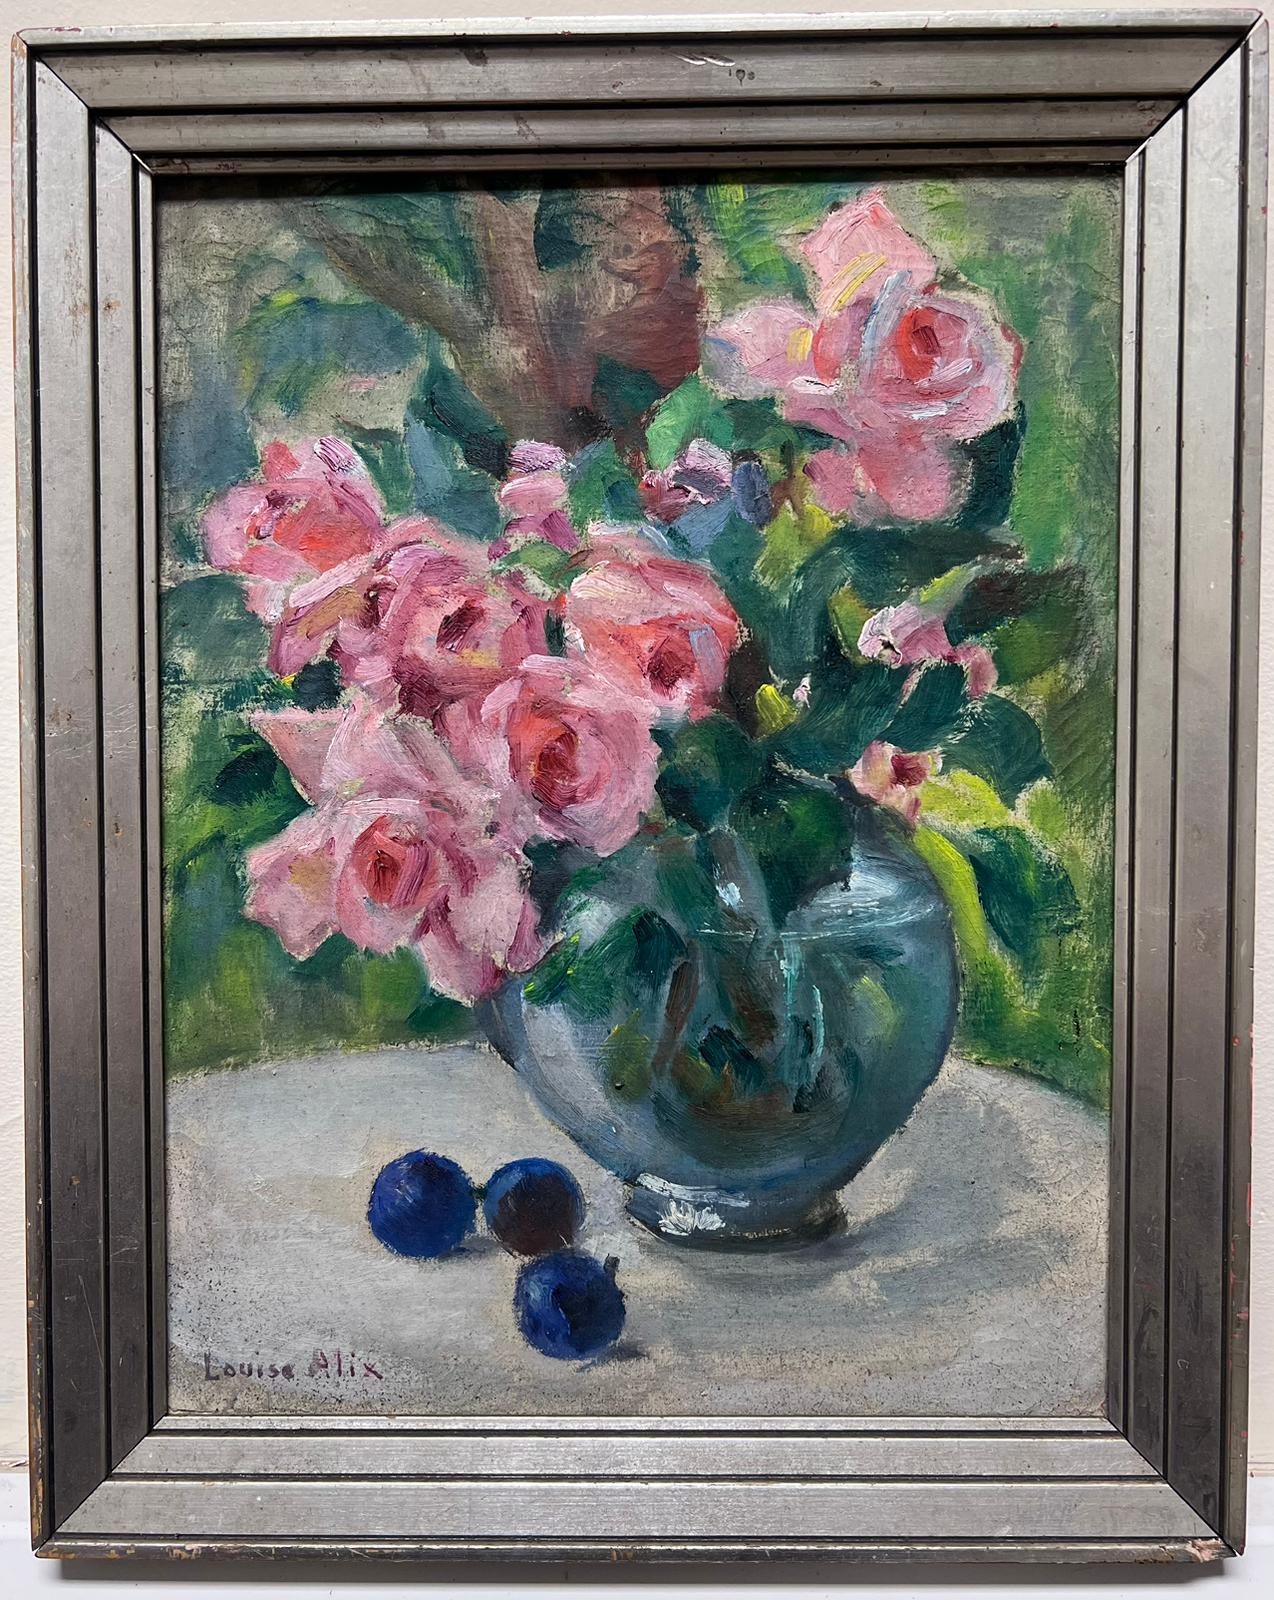 Pink Roses
by Louise Alix (French, 1888-1980) *see notes below
signed oil painting on canvas, framed
frame measures: 16 high by 12.75 inches wide
canvas measures: 14 x 11 inches
condition: overall very good and sound, a few scuffs and marks to the